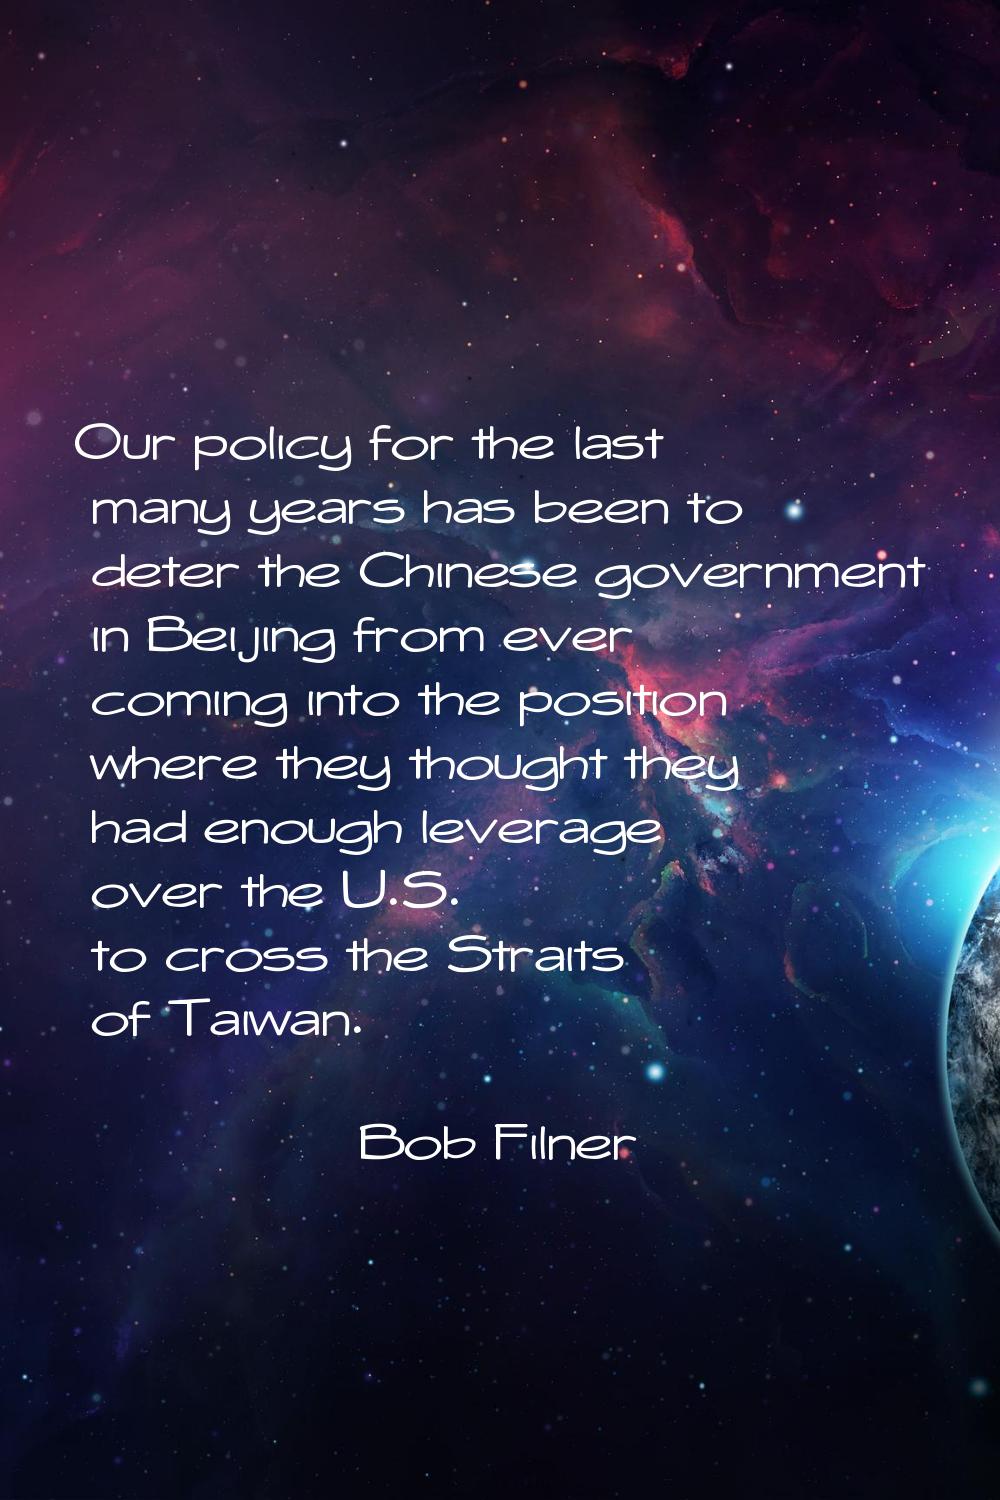 Our policy for the last many years has been to deter the Chinese government in Beijing from ever co